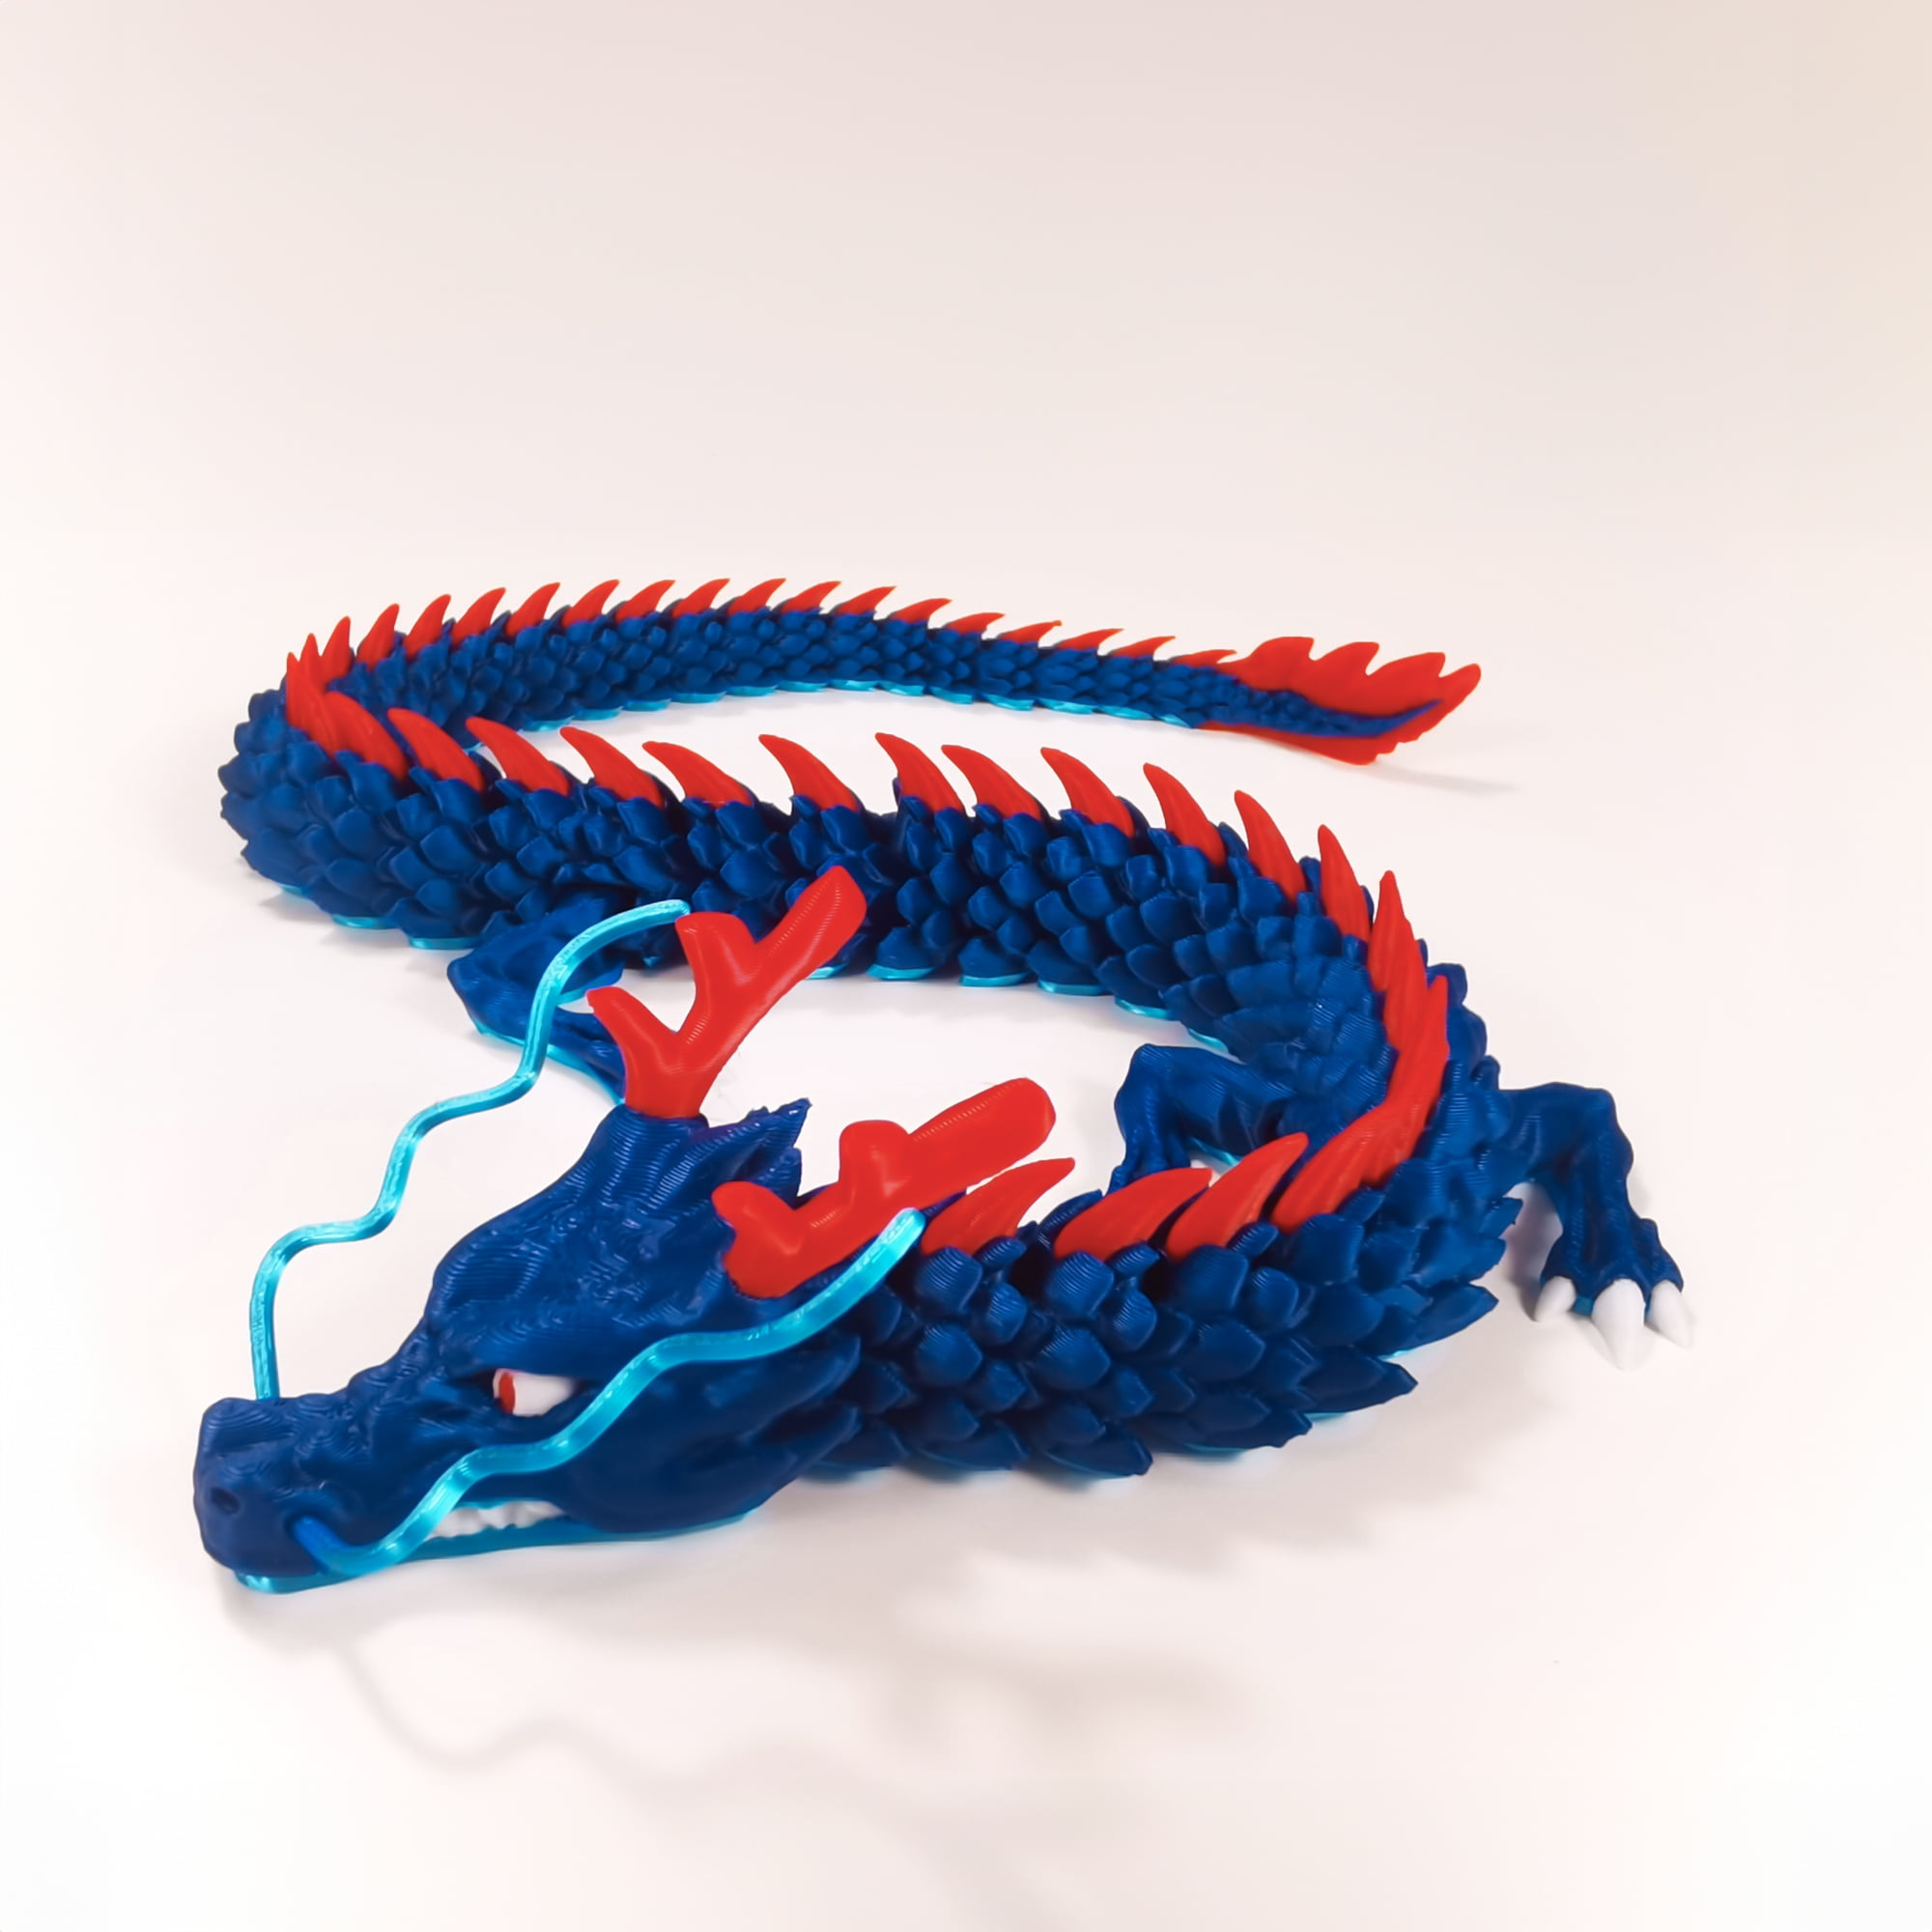 3D Printed Dragon - Customizable, Made to Order Articulated Fidget Mythical  Dragon Toy, Gift (XL, Dark Grey with Silvery Blue Belly)